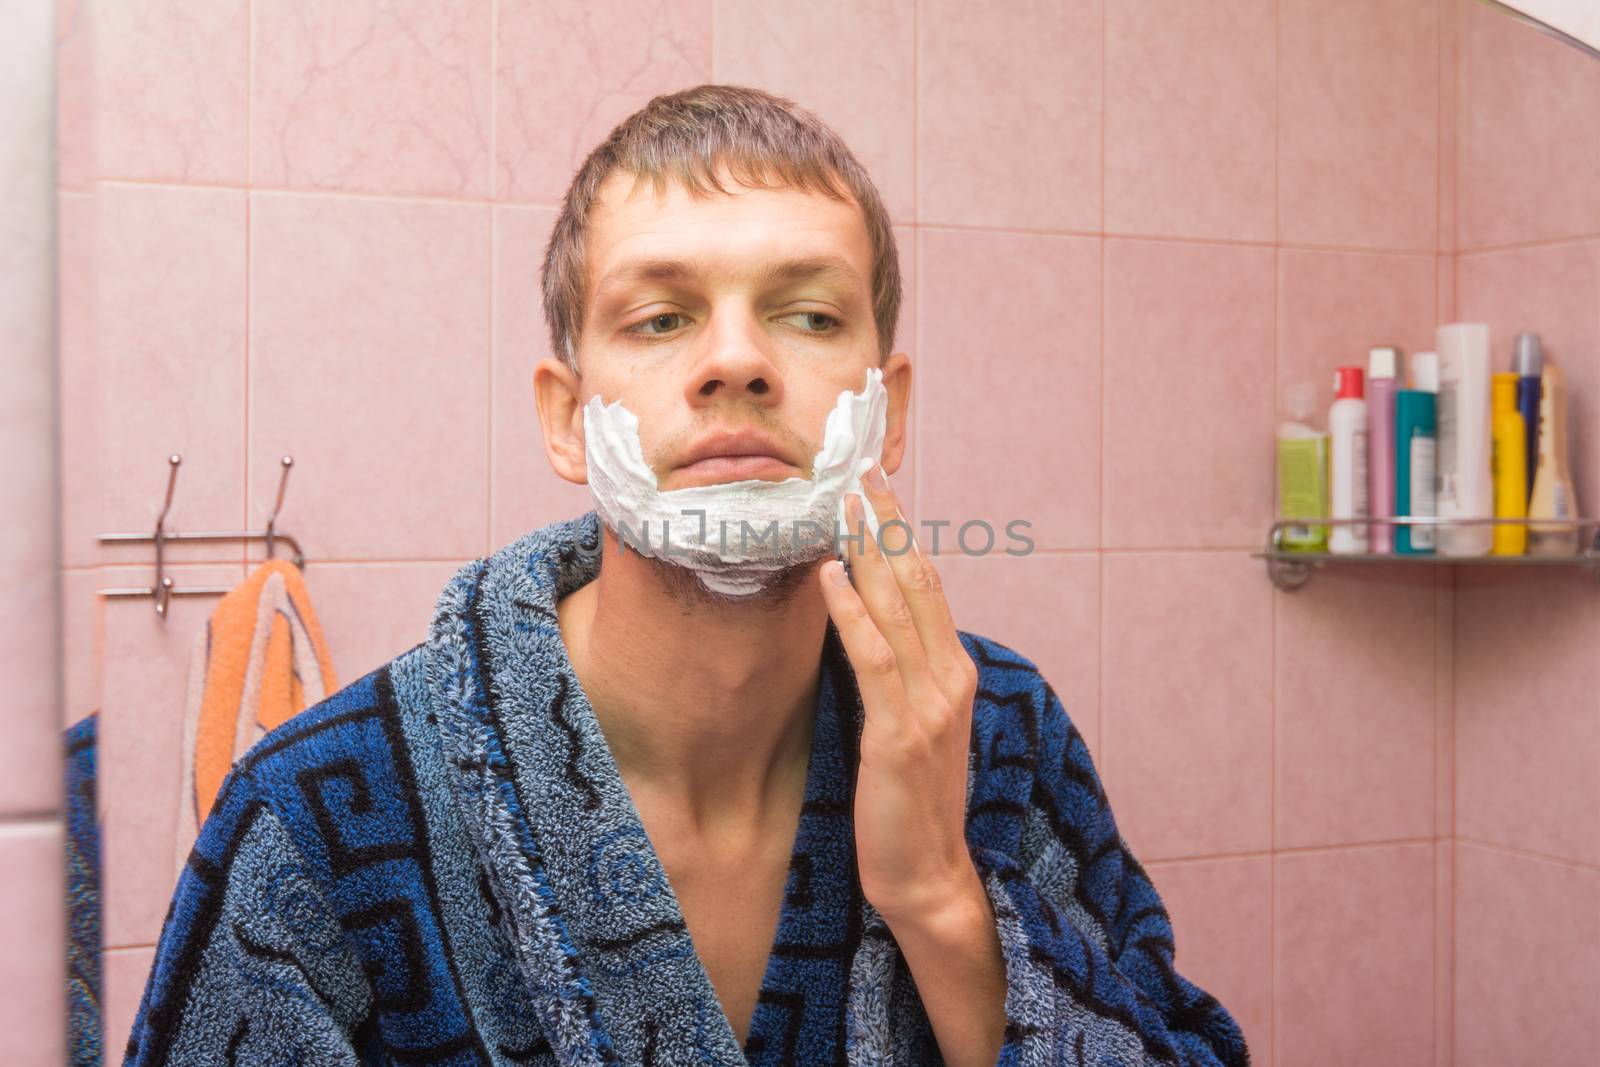 The young man gets shaving foam on his cheeks